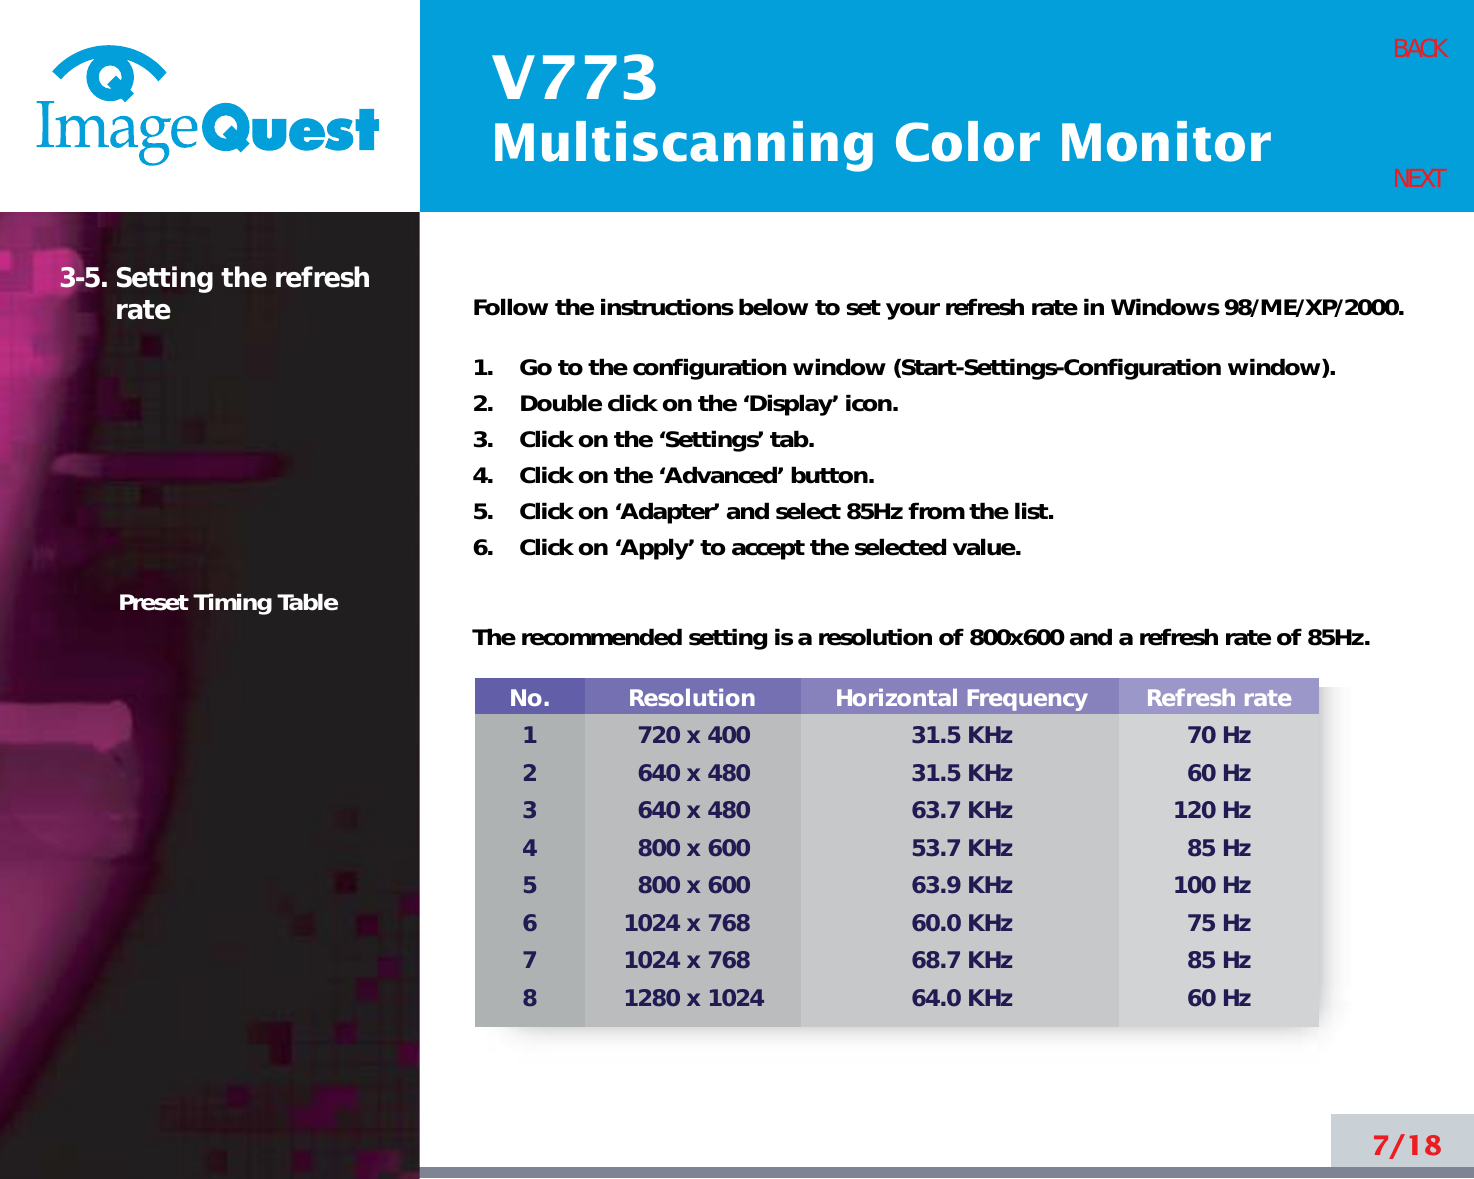 V773Multiscanning Color Monitor7/18BACKNEXT3-5. Setting the refreshratePreset Timing TableNo.12345678Resolution720 x 400640 x 480640 x 480800 x 600800 x 6001024 x 7681024 x 7681280 x 1024Horizontal Frequency31.5 KHz31.5 KHz63.7 KHz53.7 KHz63.9 KHz60.0 KHz68.7 KHz64.0 KHzRefresh rate70 Hz60 Hz120 Hz85 Hz100 Hz75 Hz85 Hz60 HzFollow the instructions below to set your refresh rate in Windows 98/ME/XP/2000.1.    Go to the configuration window (Start-Settings-Configuration window).2.    Double click on the ‘Display’ icon.3.    Click on the ‘Settings’ tab.4.    Click on the ‘Advanced’ button.5.    Click on ‘Adapter’ and select 85Hz from the list.6.    Click on ‘Apply’ to accept the selected value.The recommended setting is a resolution of 800x600 and a refresh rate of 85Hz. 